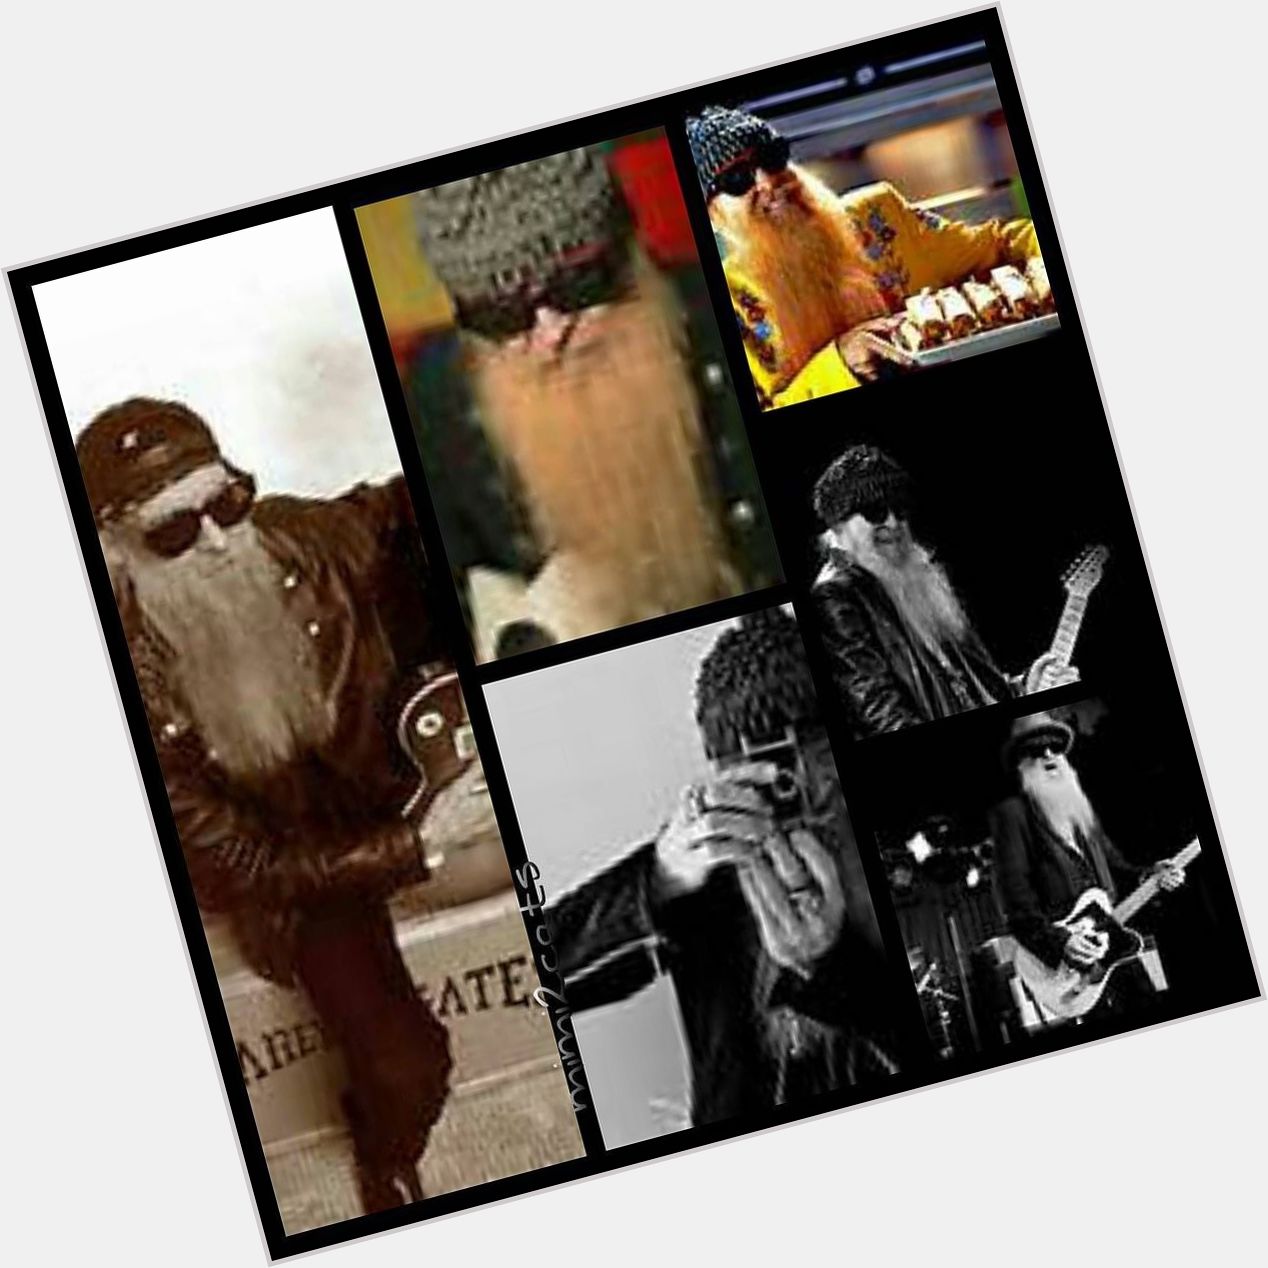 Happy Birthday Wishes Today To Lead Guitarist - Lead Vocalist of ZZ Top Billy Gibbons Who Was Born on This Day in 1 